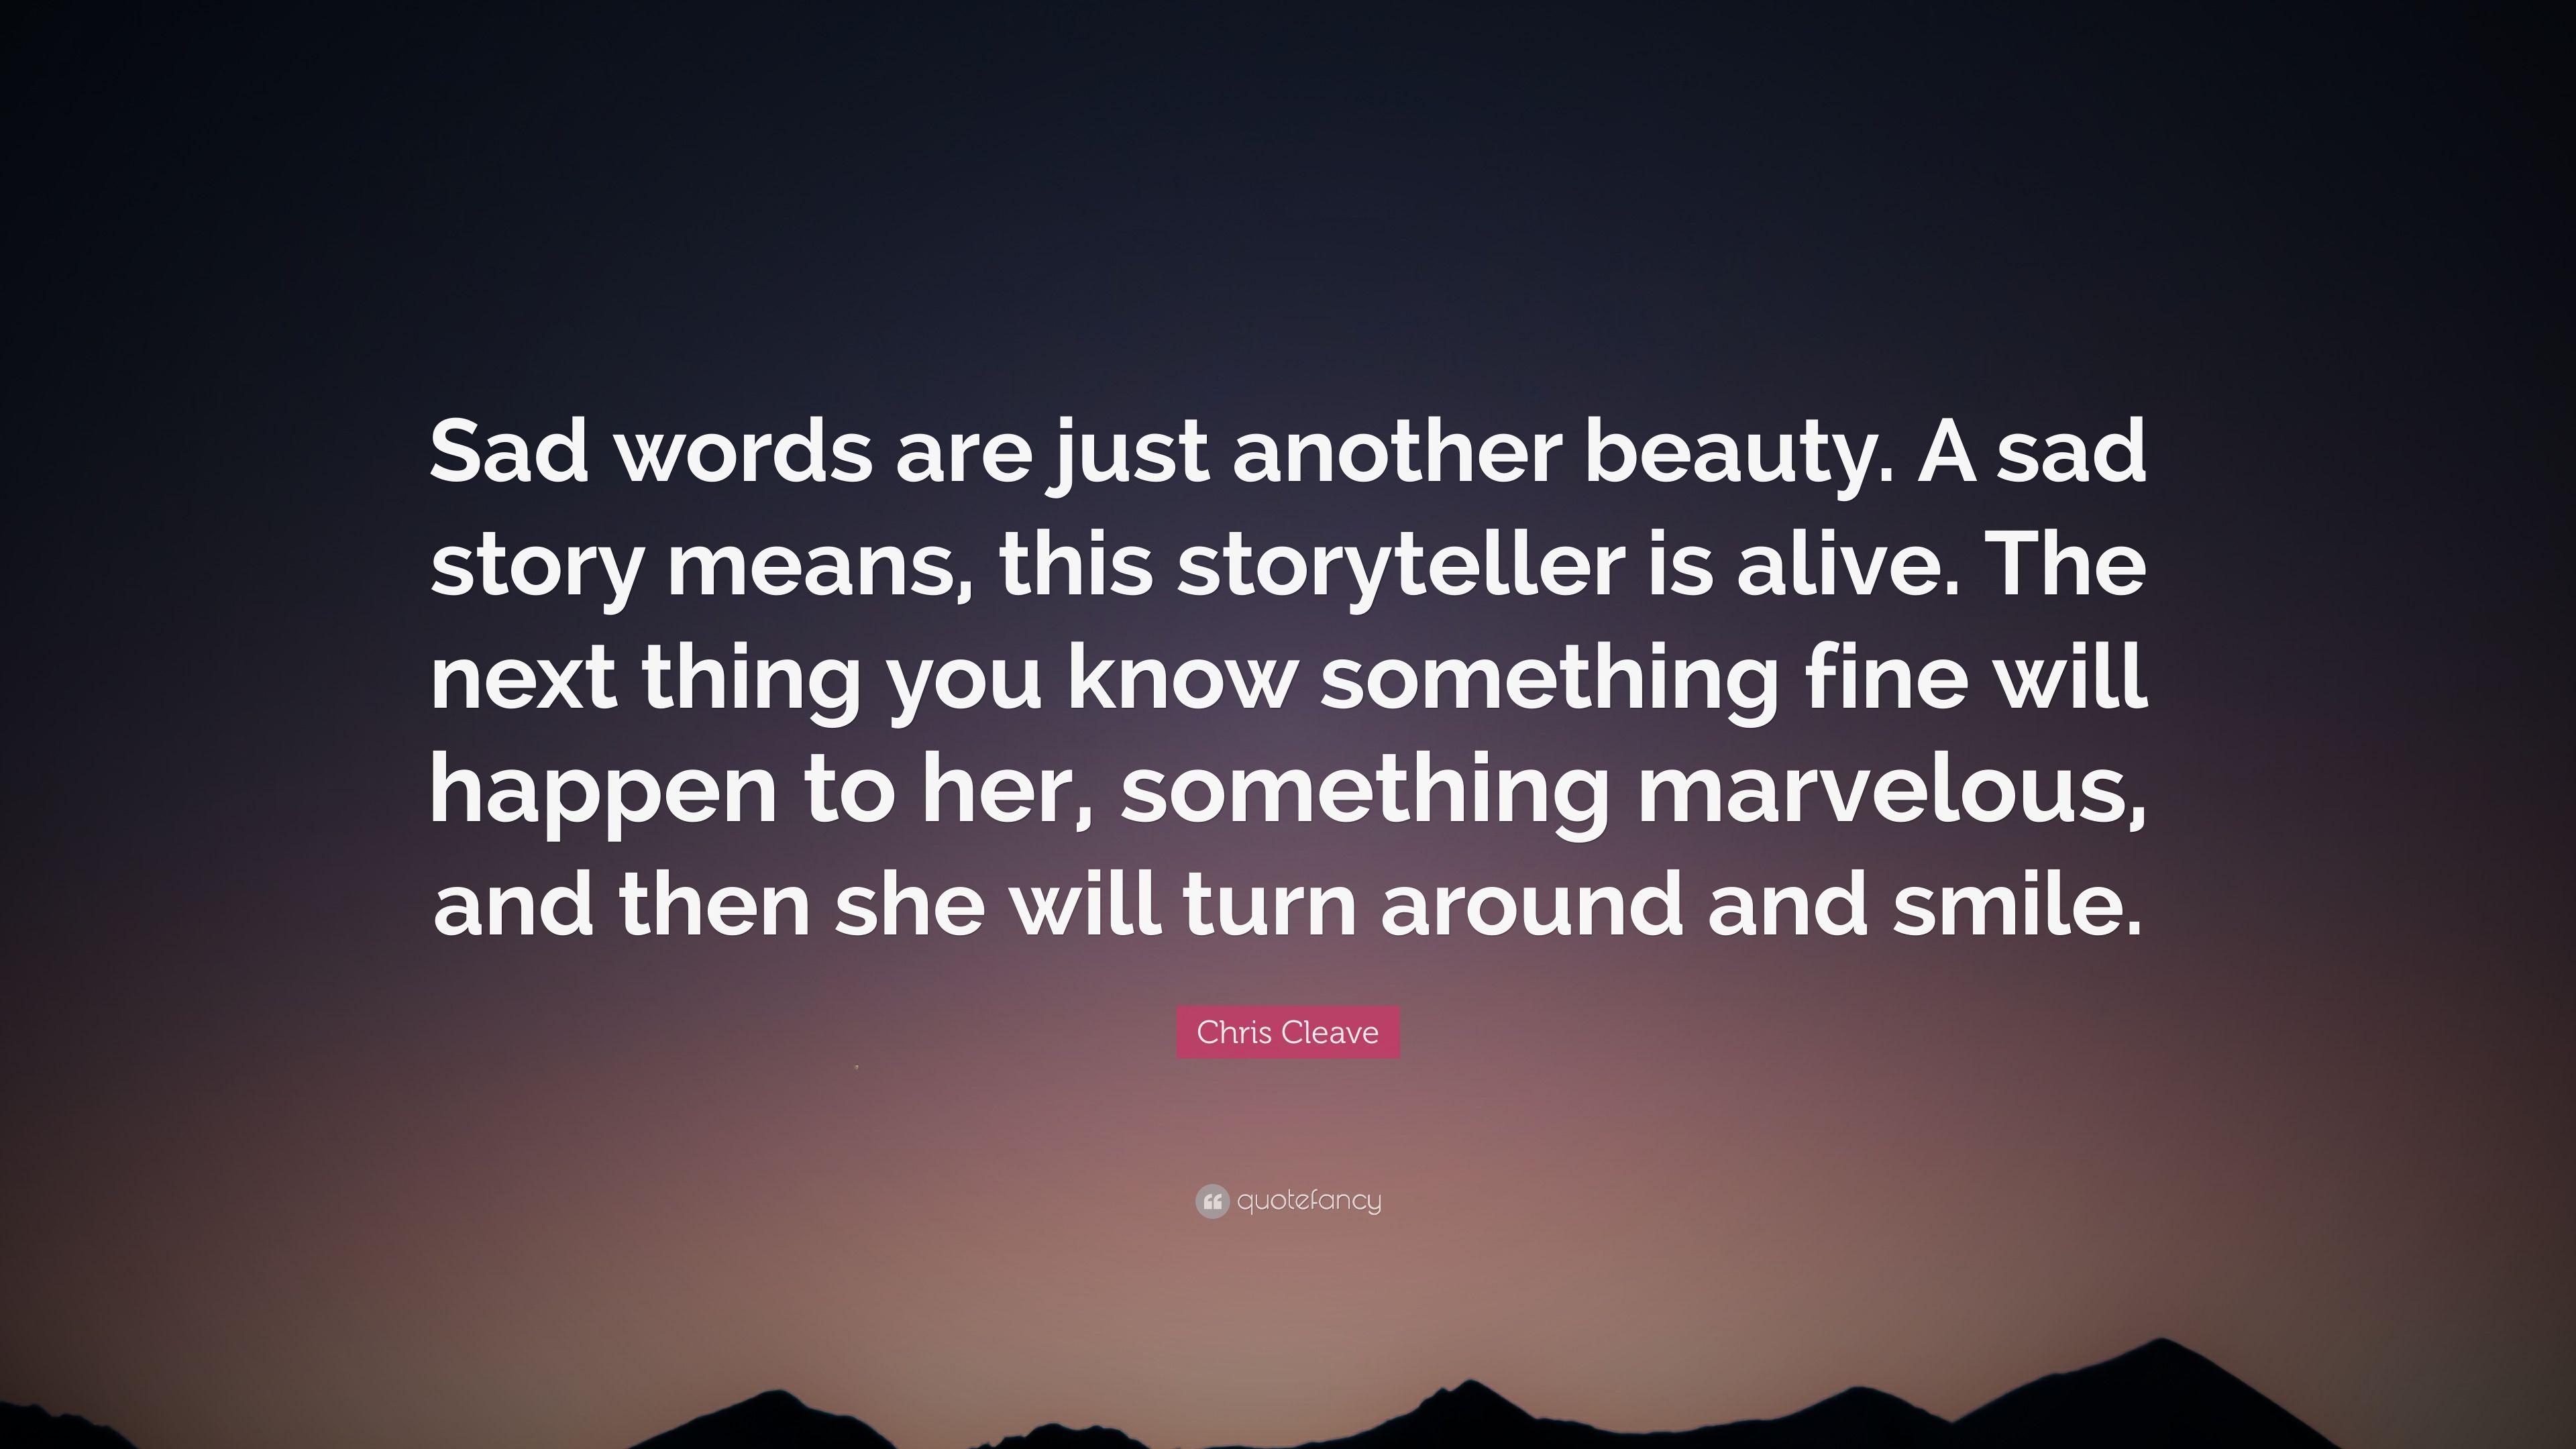 Chris Cleave Quote: “Sad words are just another beauty. A